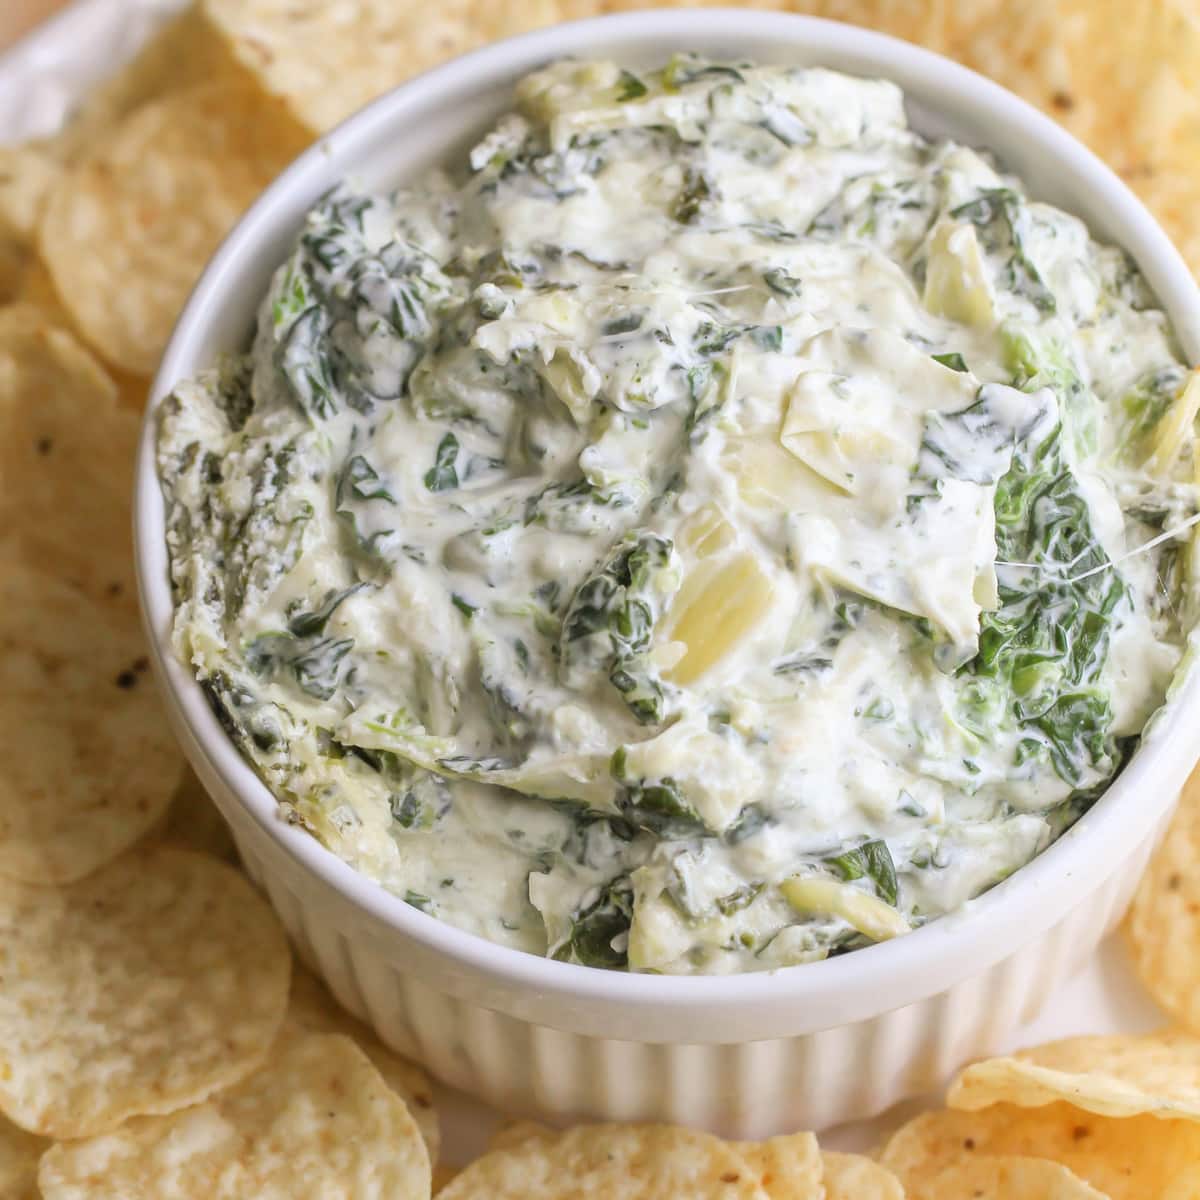 Christmas appetizers -  a bowl of spinach artichoke dip served with chips.